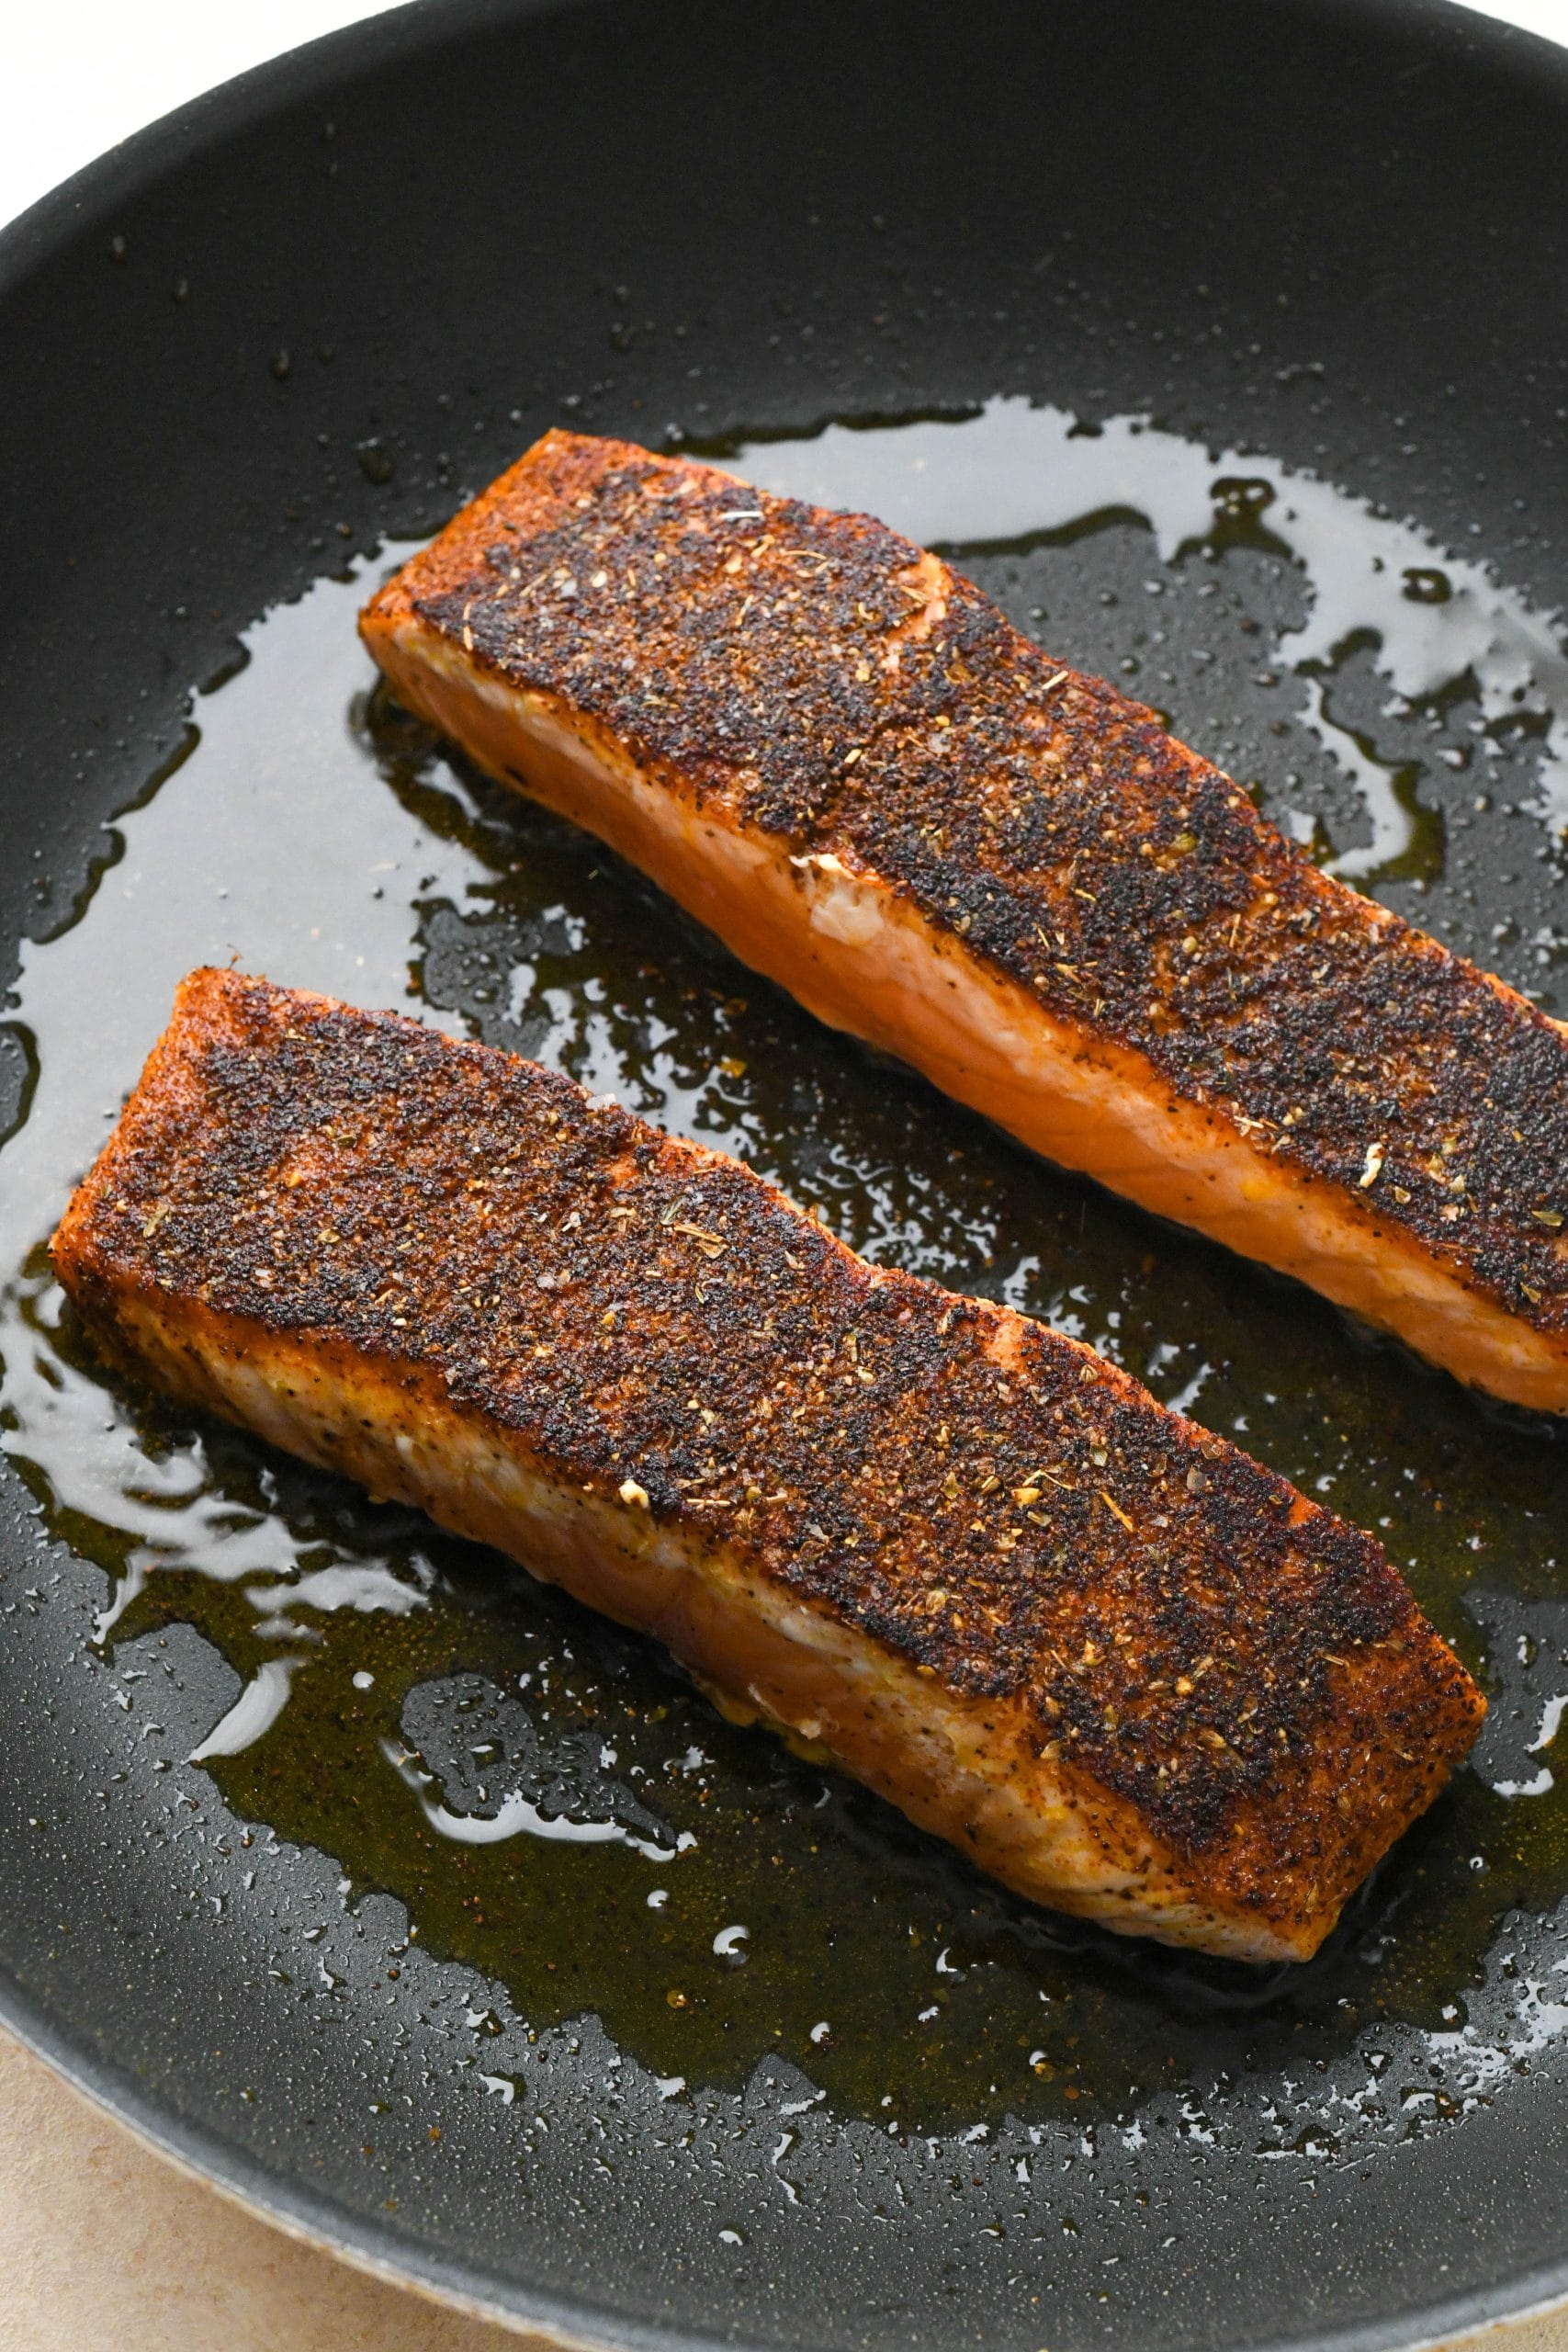 Salmon filets seared on the flesh side in a small skillet.